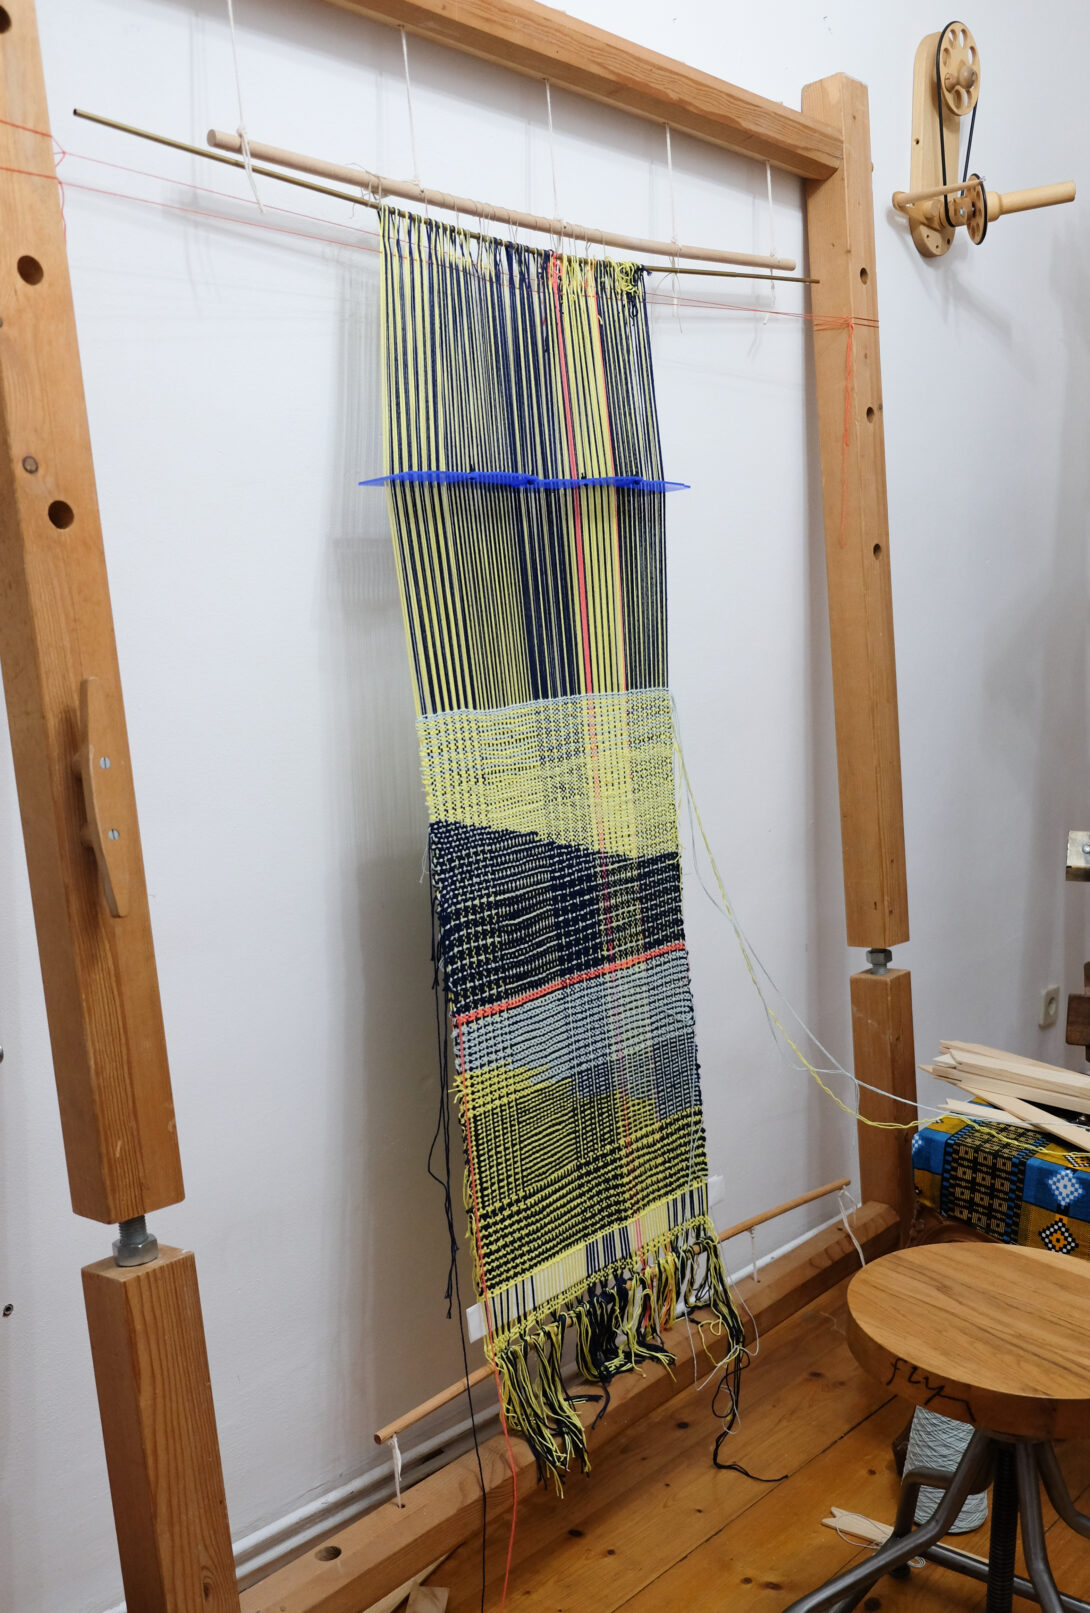 almost finnished weaving with 5 Johanns still on my loom